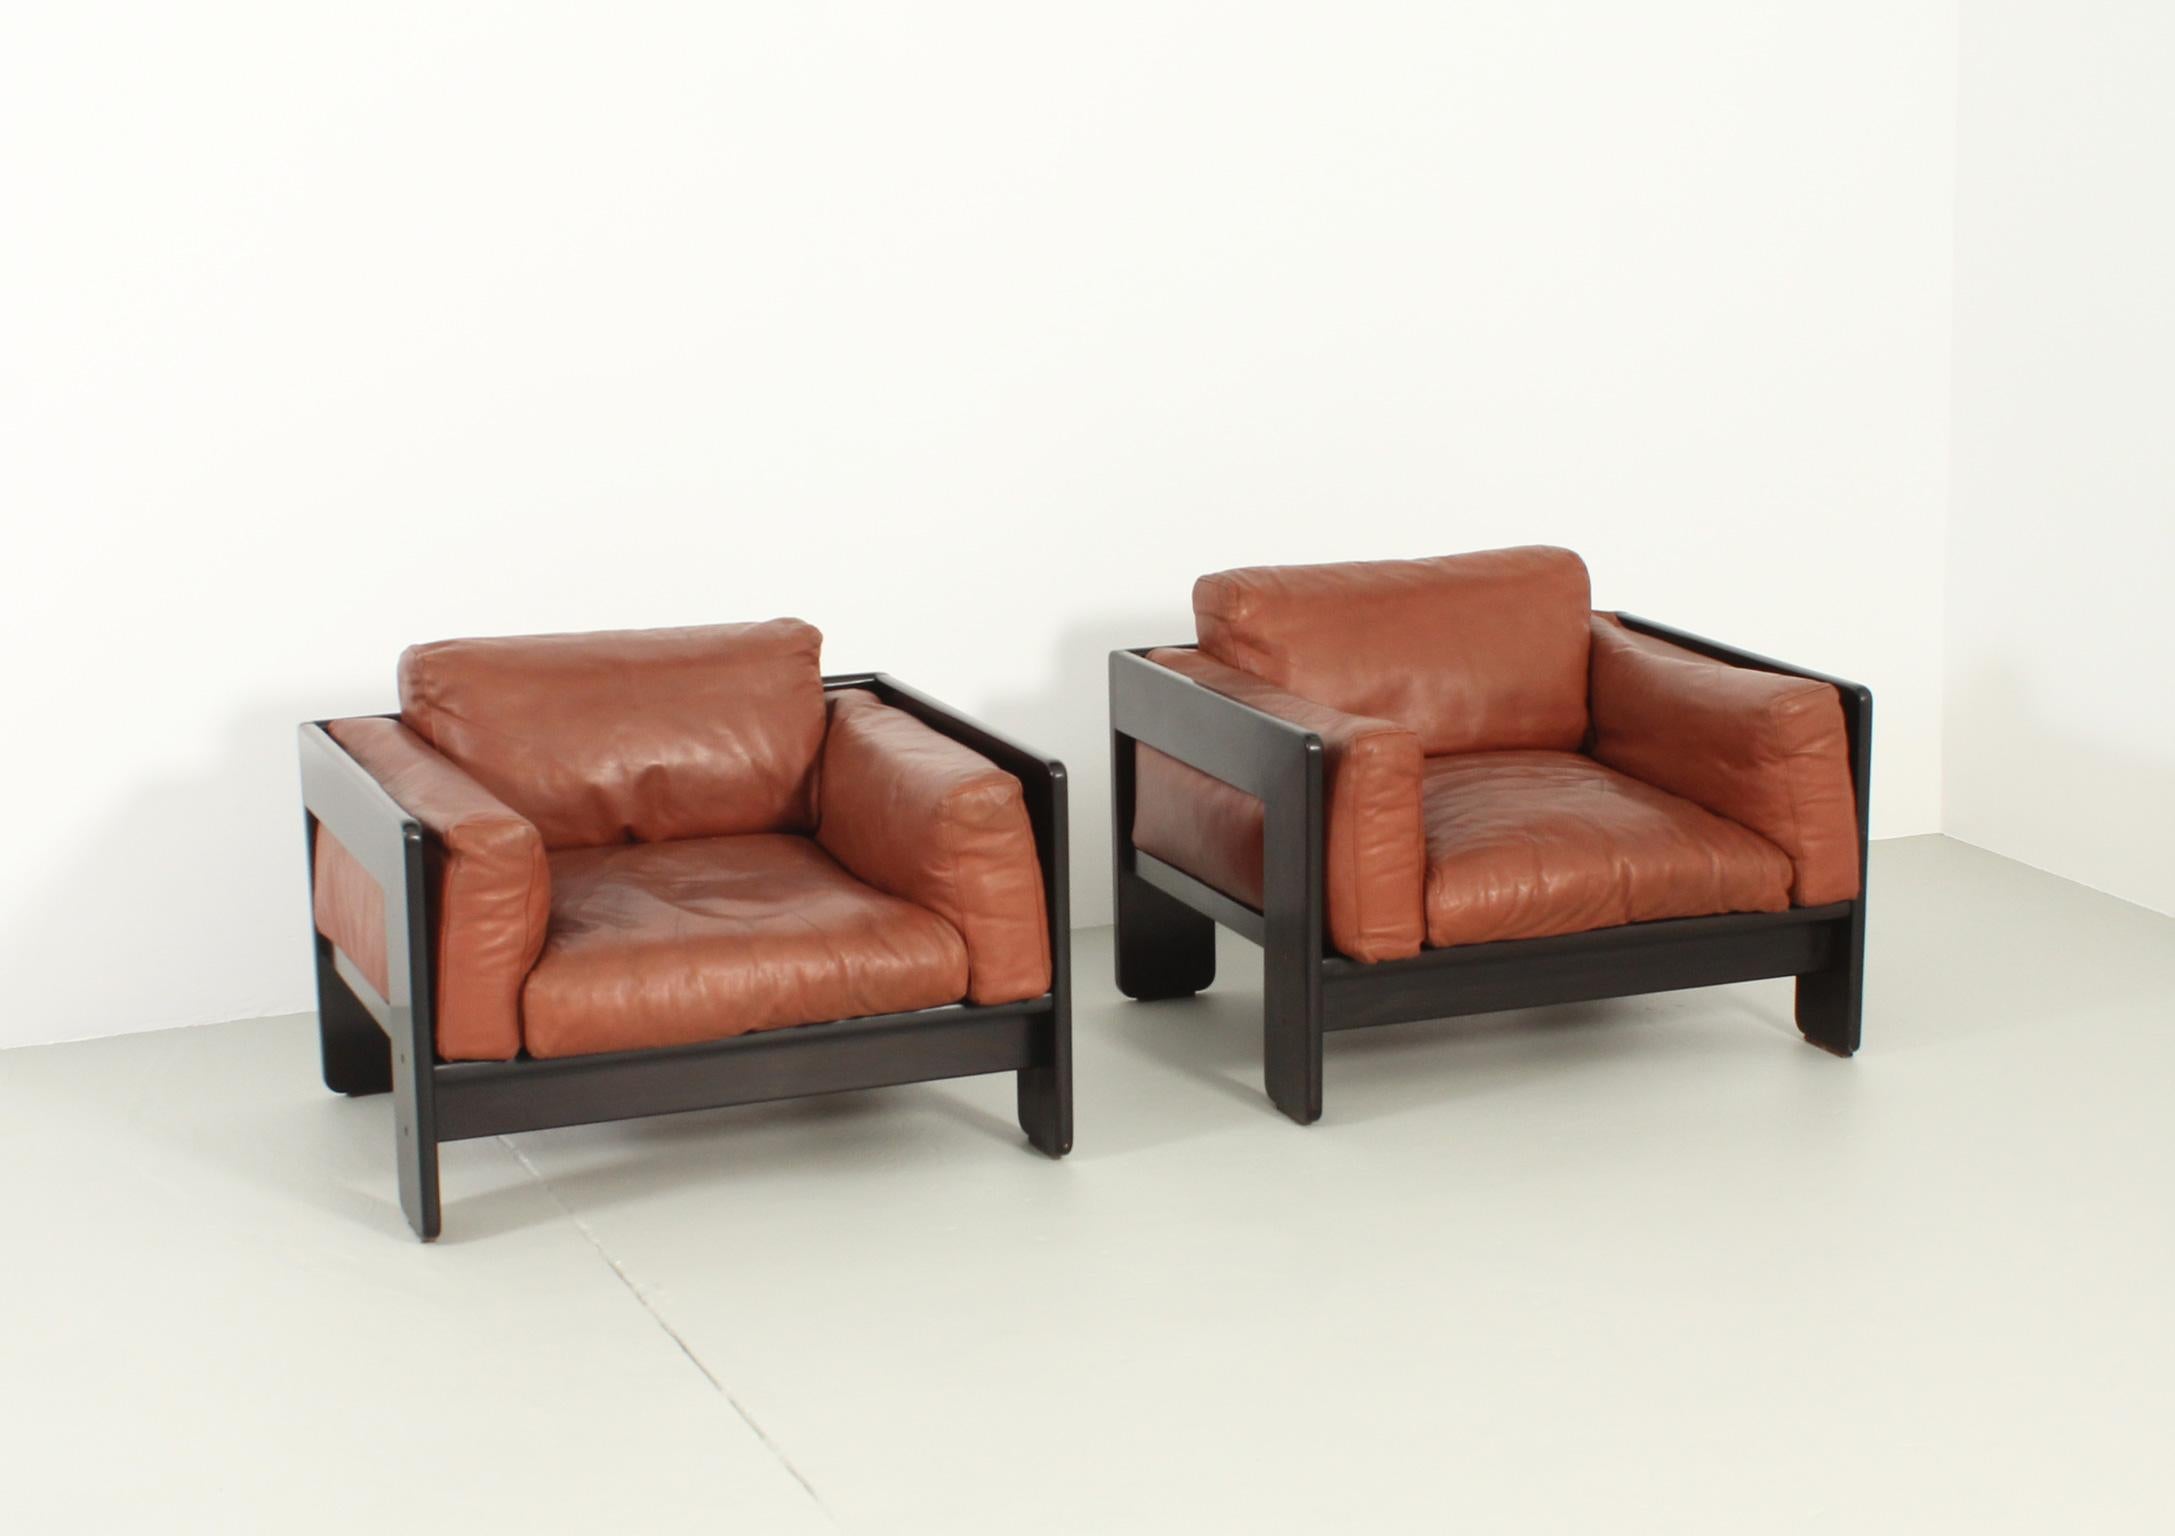 Italian Pair of Bastiano Armchairs by Tobia Scarpa for Gavina, 1960 For Sale